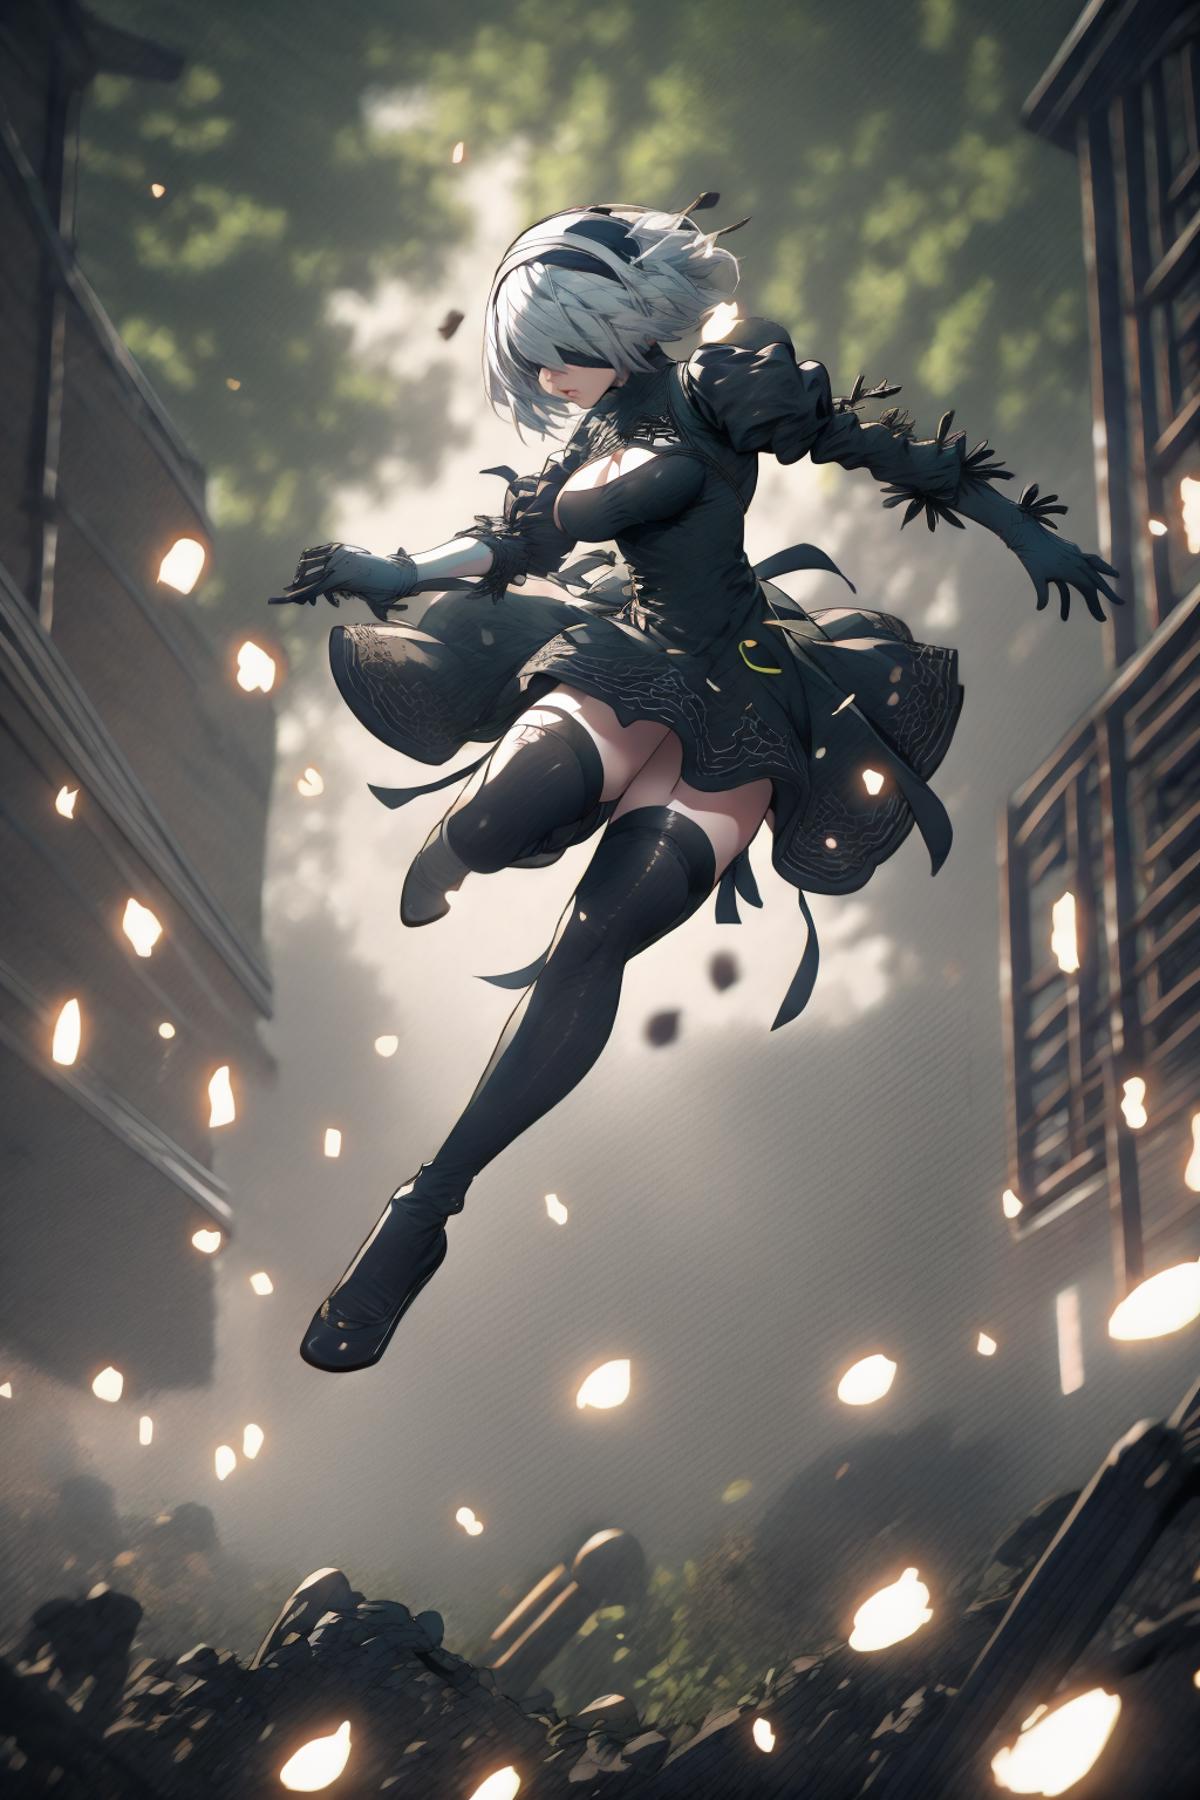 The Anime Character in Action: A Girl Jumping High with Black Boots, Black Dress, and Black Gloves.